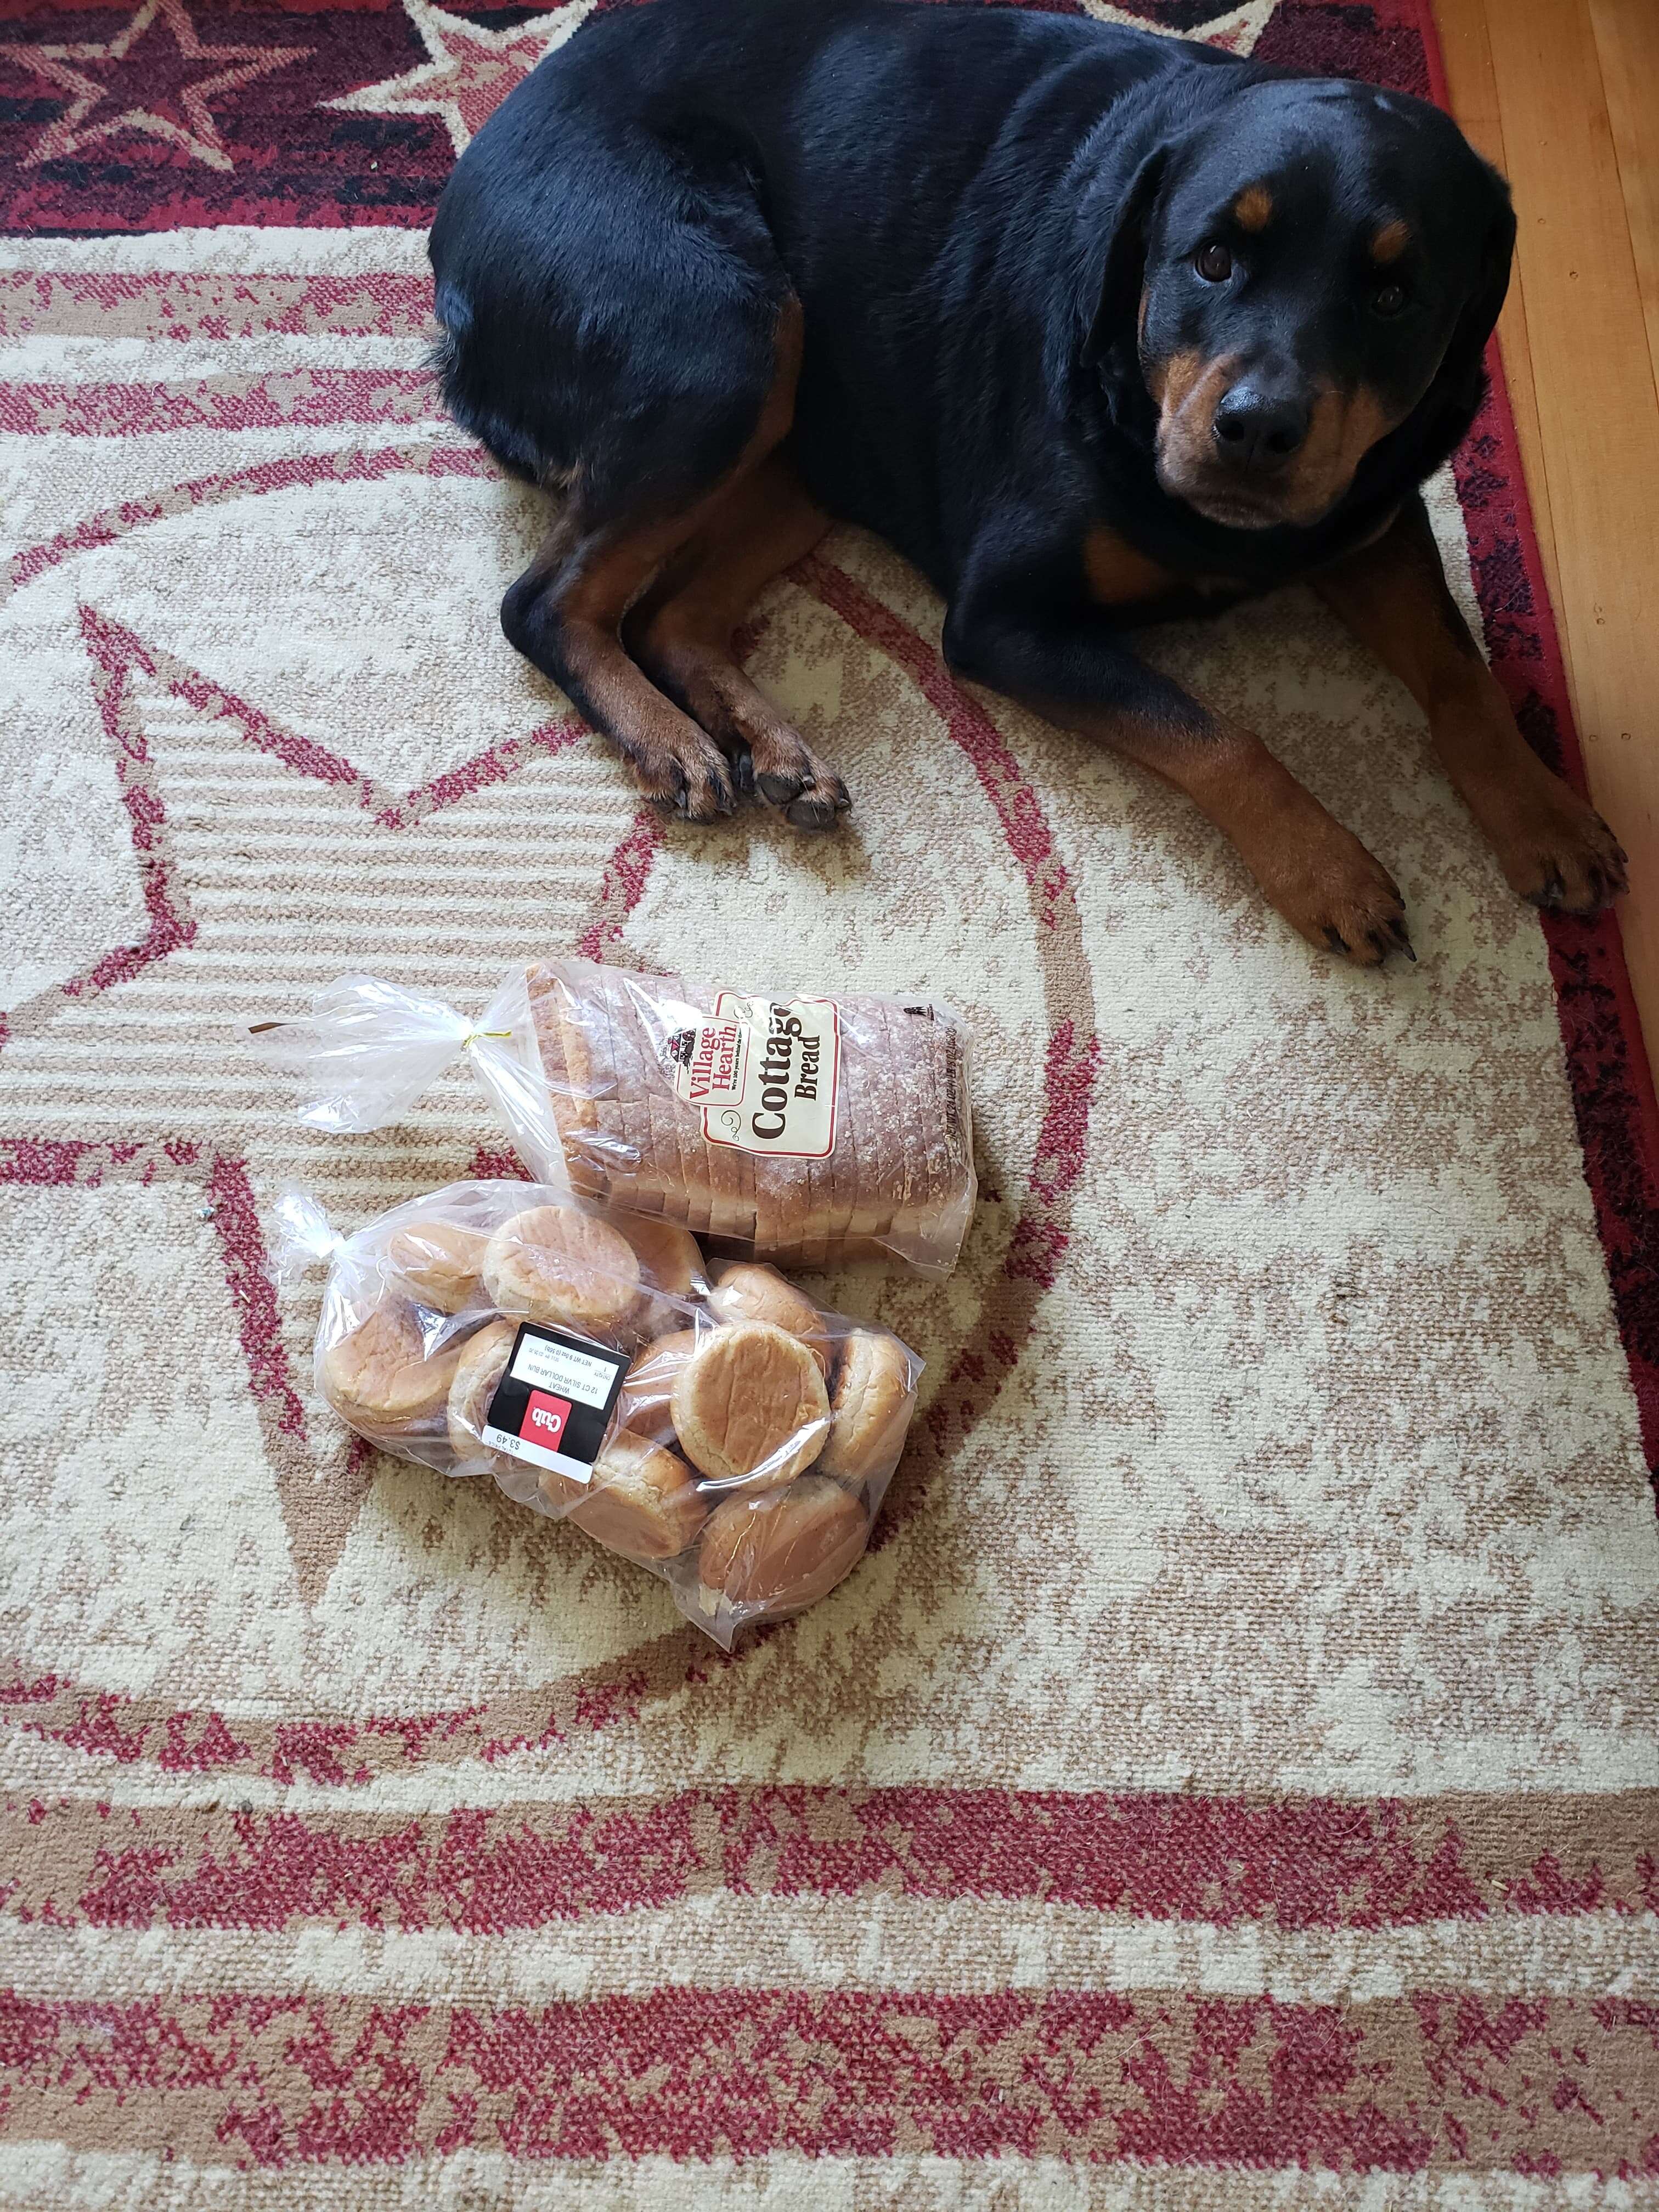 Jakey the dog hides and protects the bread